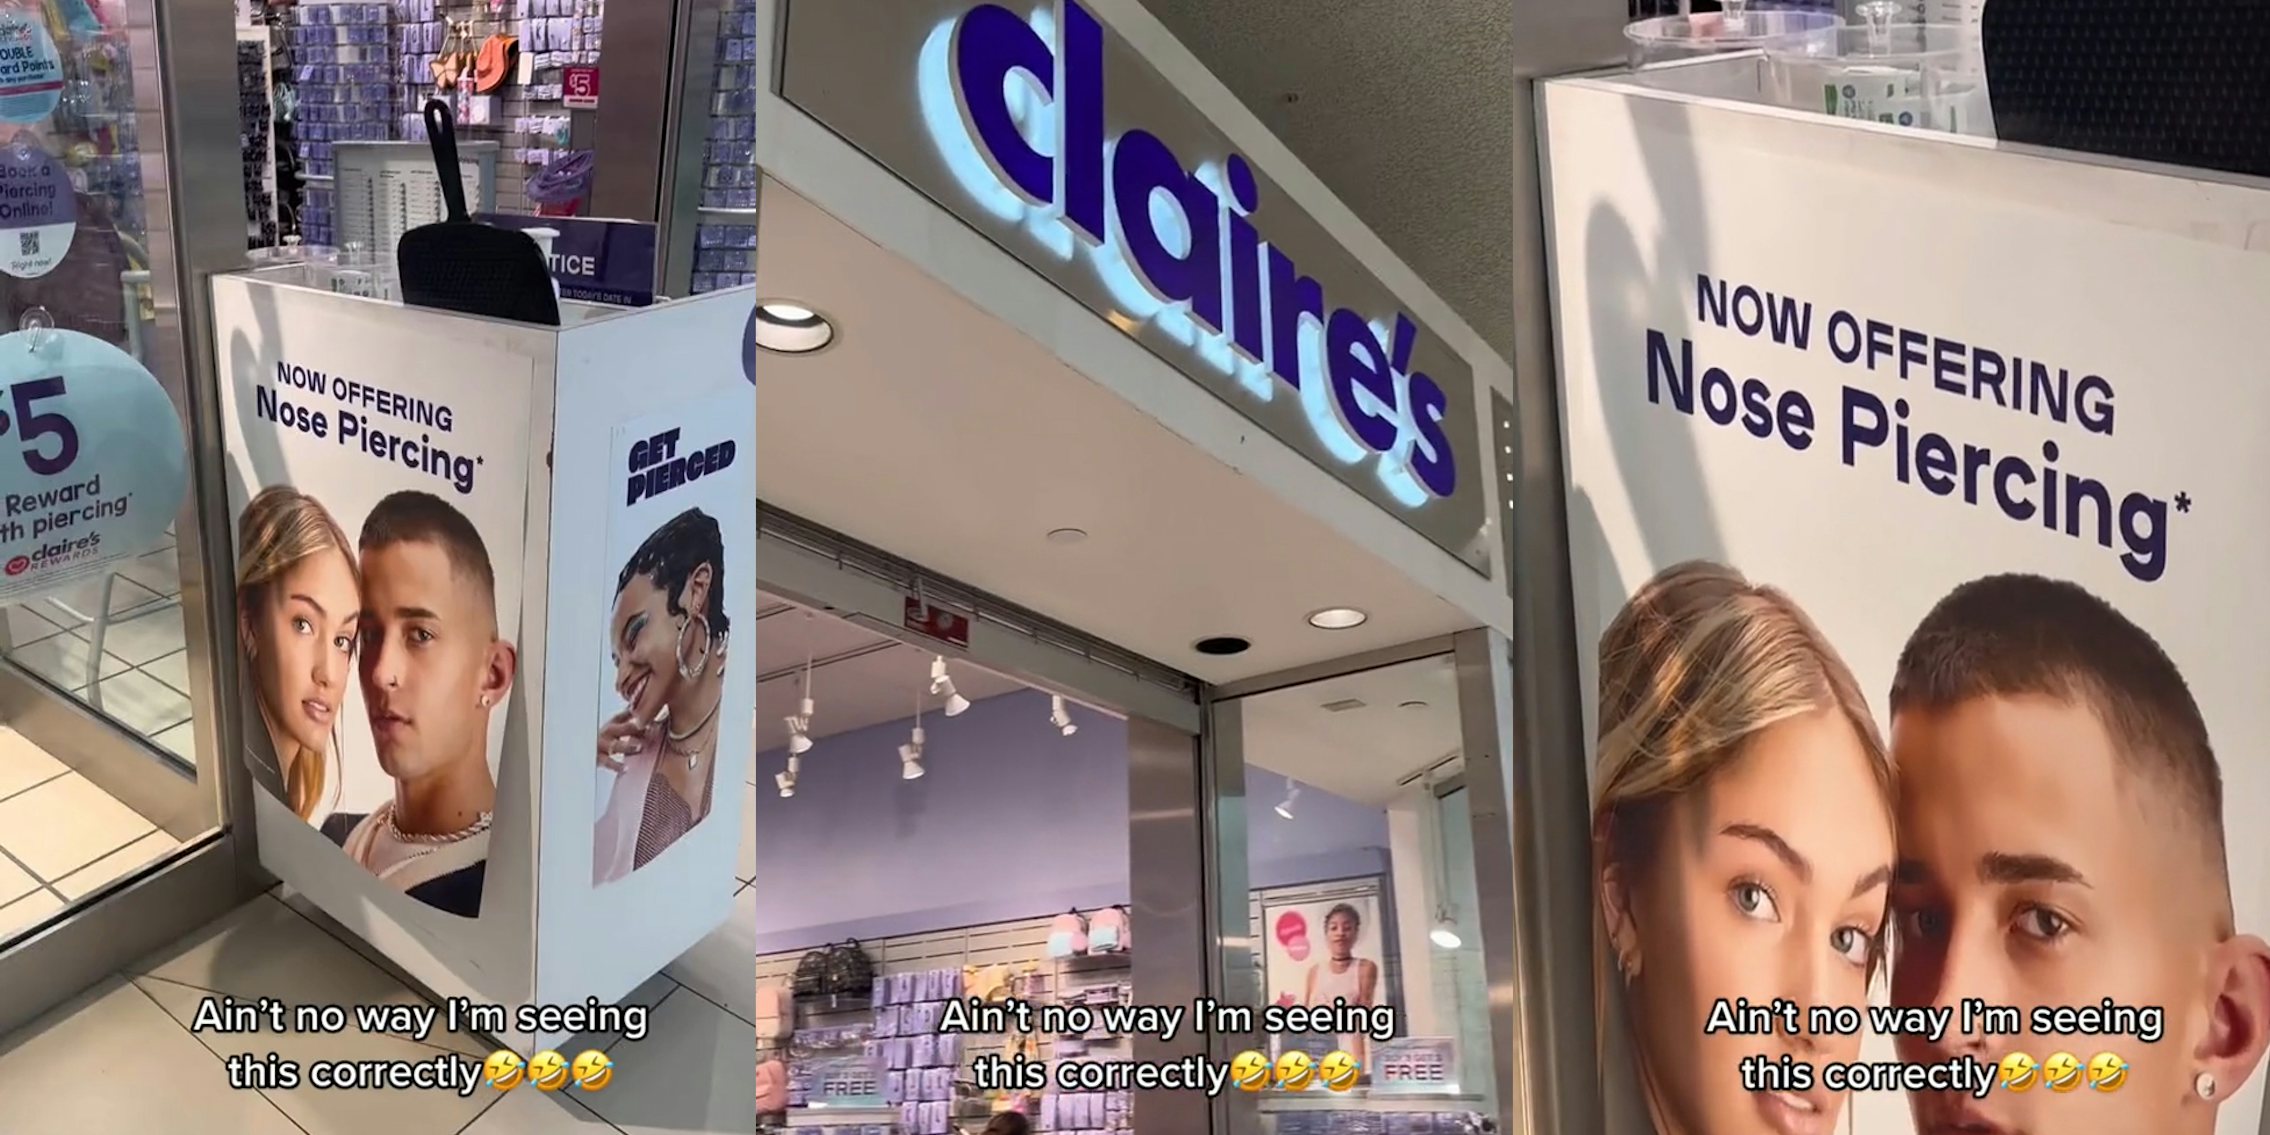 I work at Claire's - people always slam our piercings but the